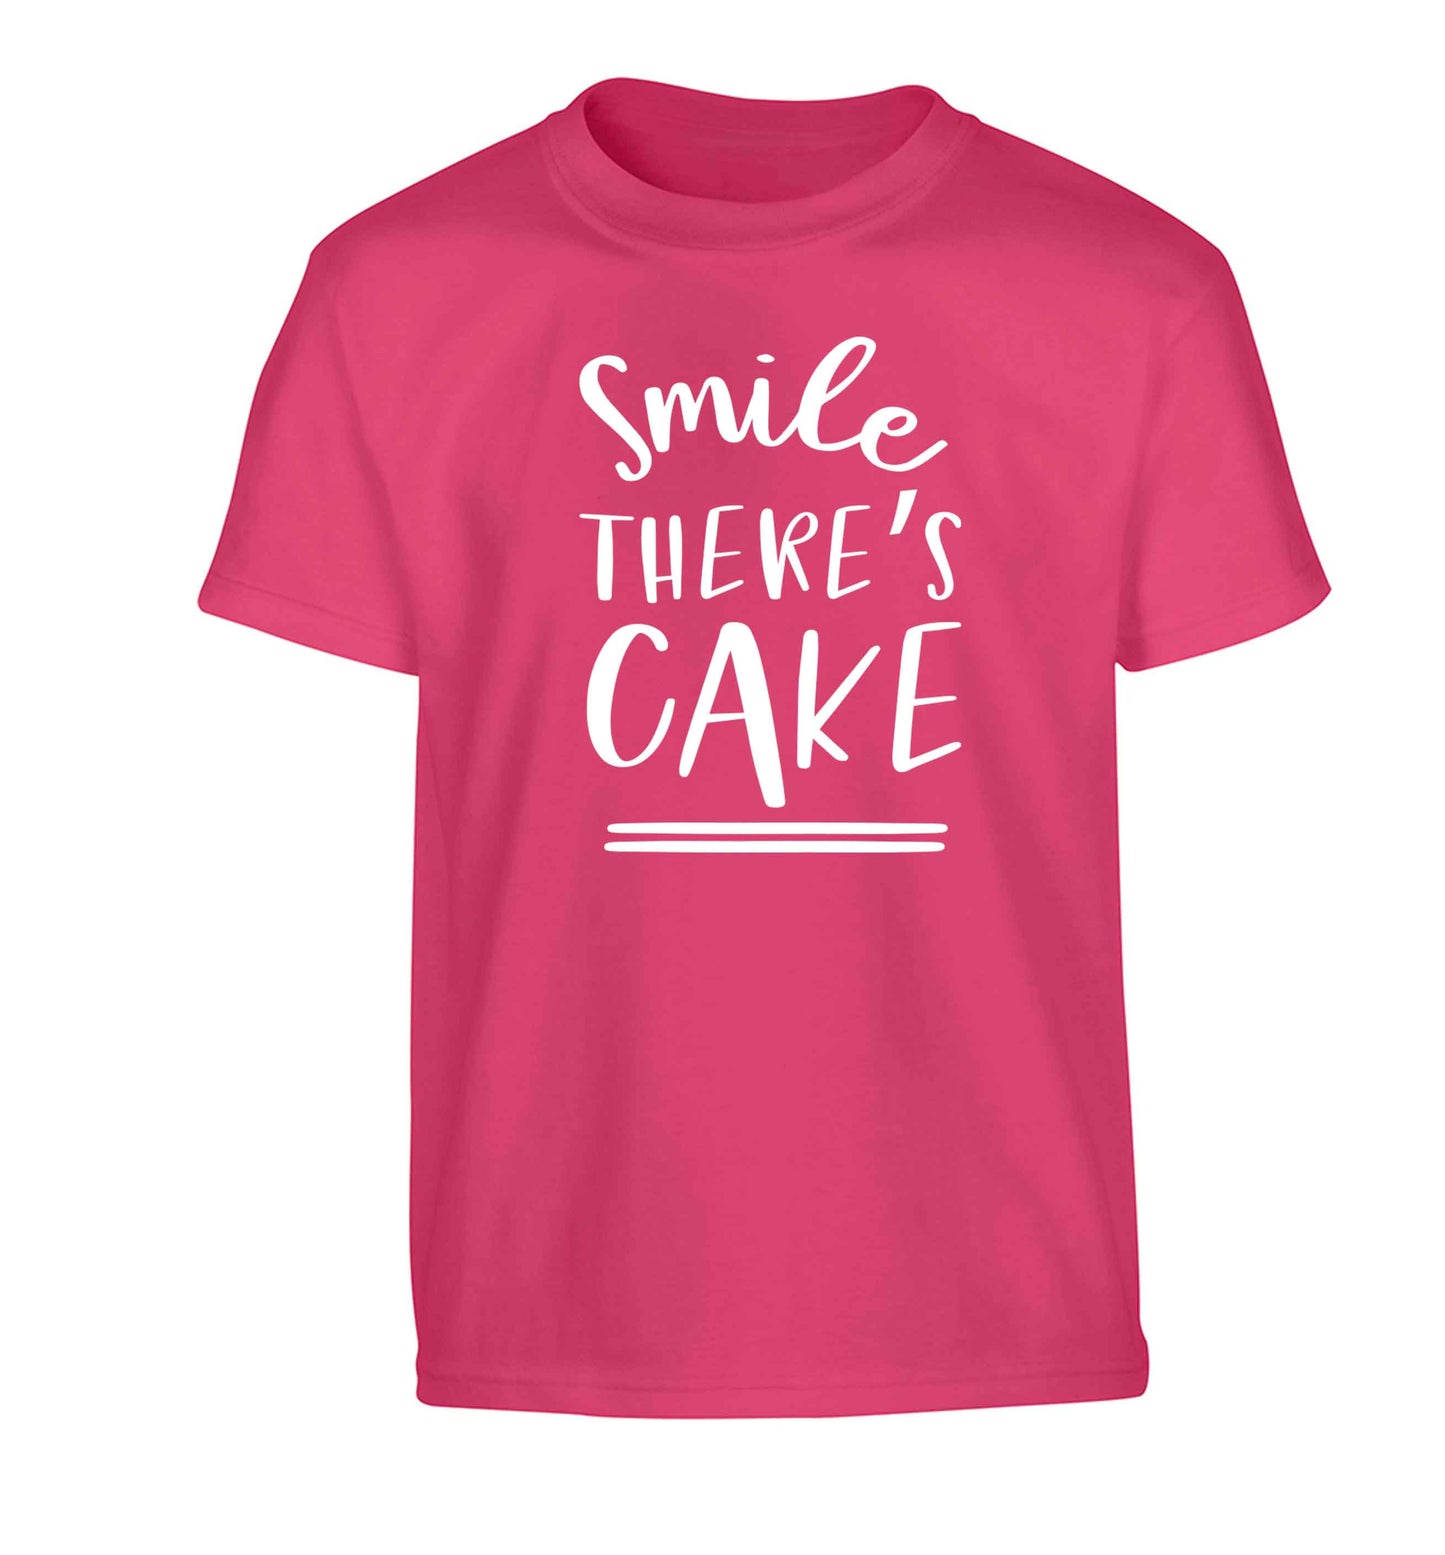 Smile there's cake Children's pink Tshirt 12-13 Years